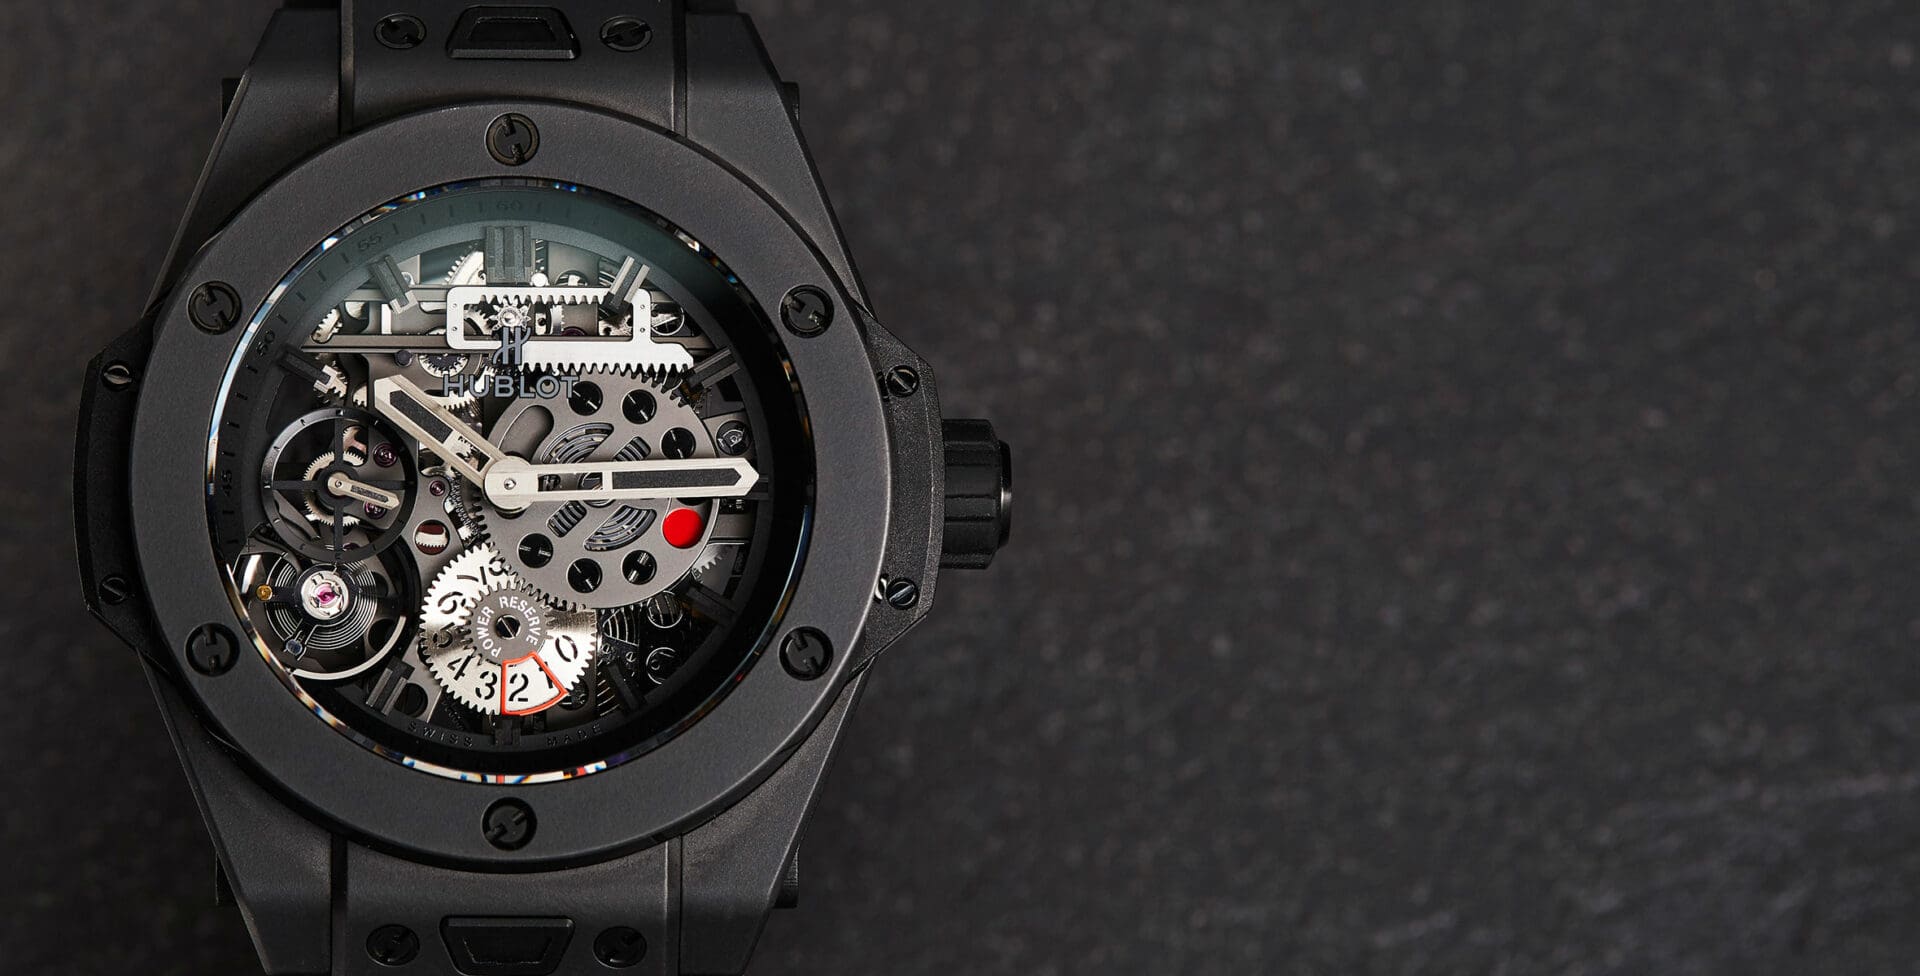 IN-DEPTH: Is this the next evolution of Hublot? The Big Bang Meca-10